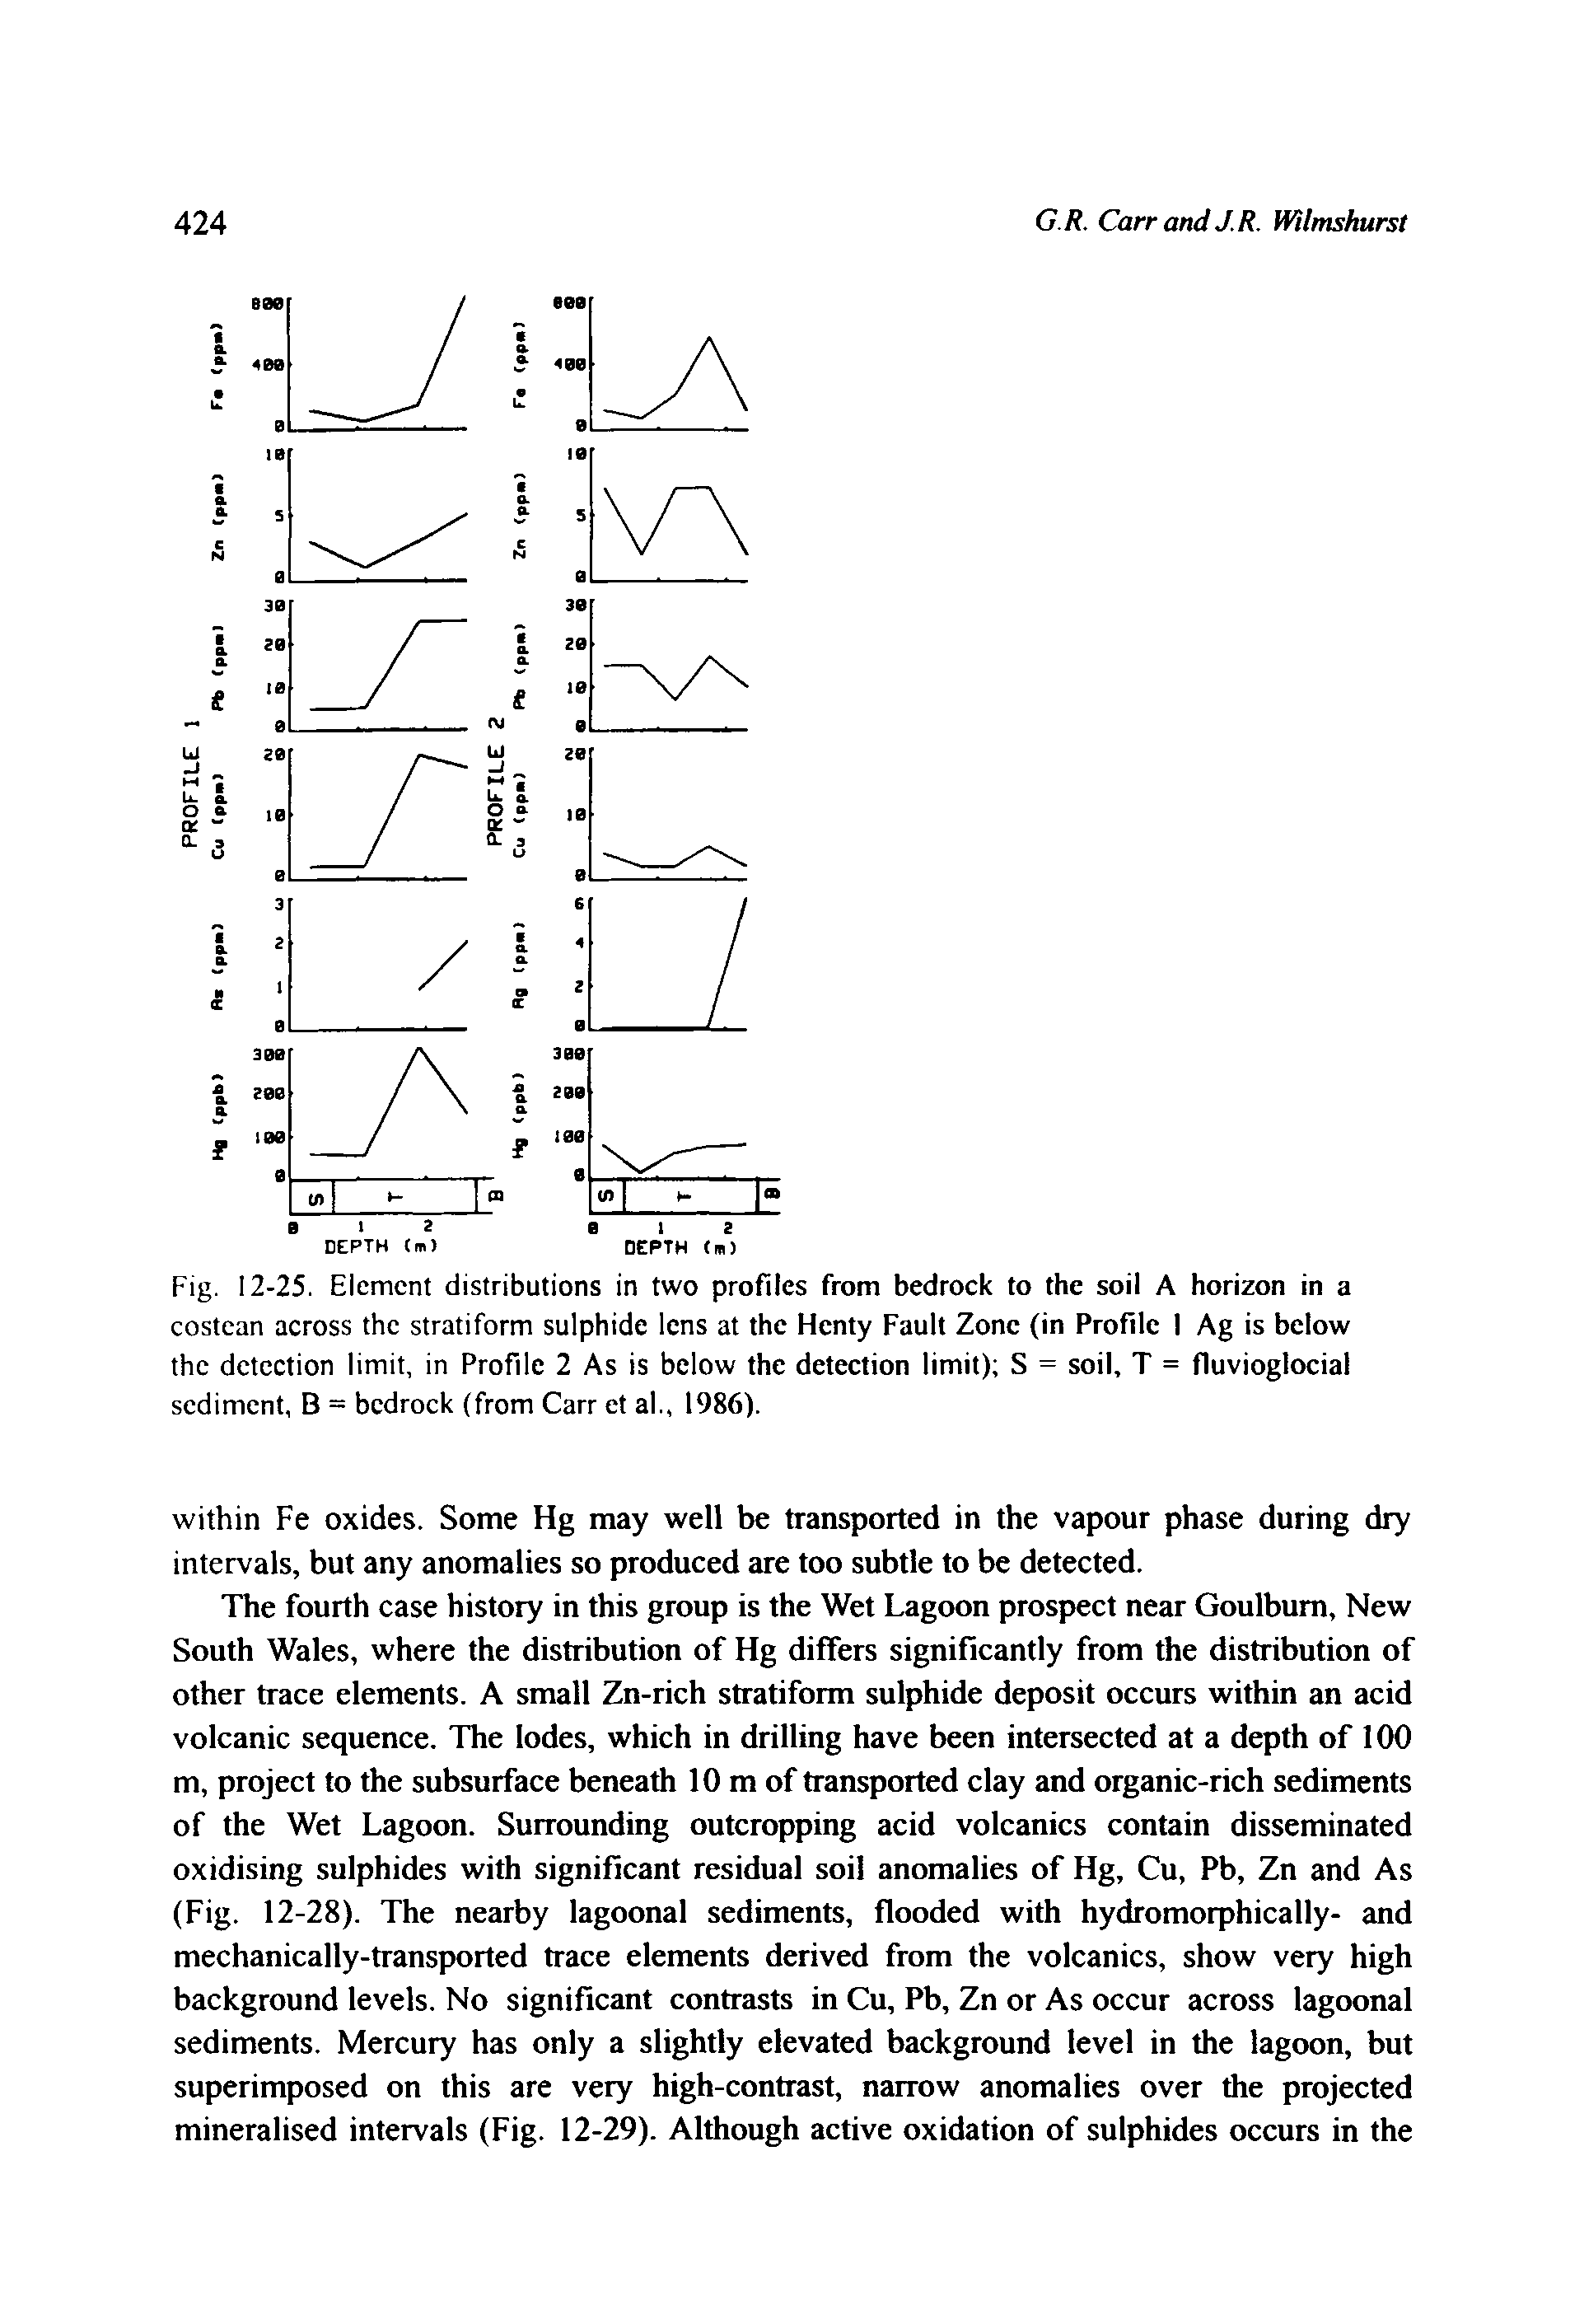 Fig. 12-25. Element distributions in two profiles from bedrock to the soil A horizon in a costean across the stratiform sulphide lens at the Hcnty Fault Zone (in Profile I Ag is below the detection limit, in Profile 2 As is below the detection limit) S = soil, T = fluvioglocial sediment, B = bedrock (from Carr et al., 1986).